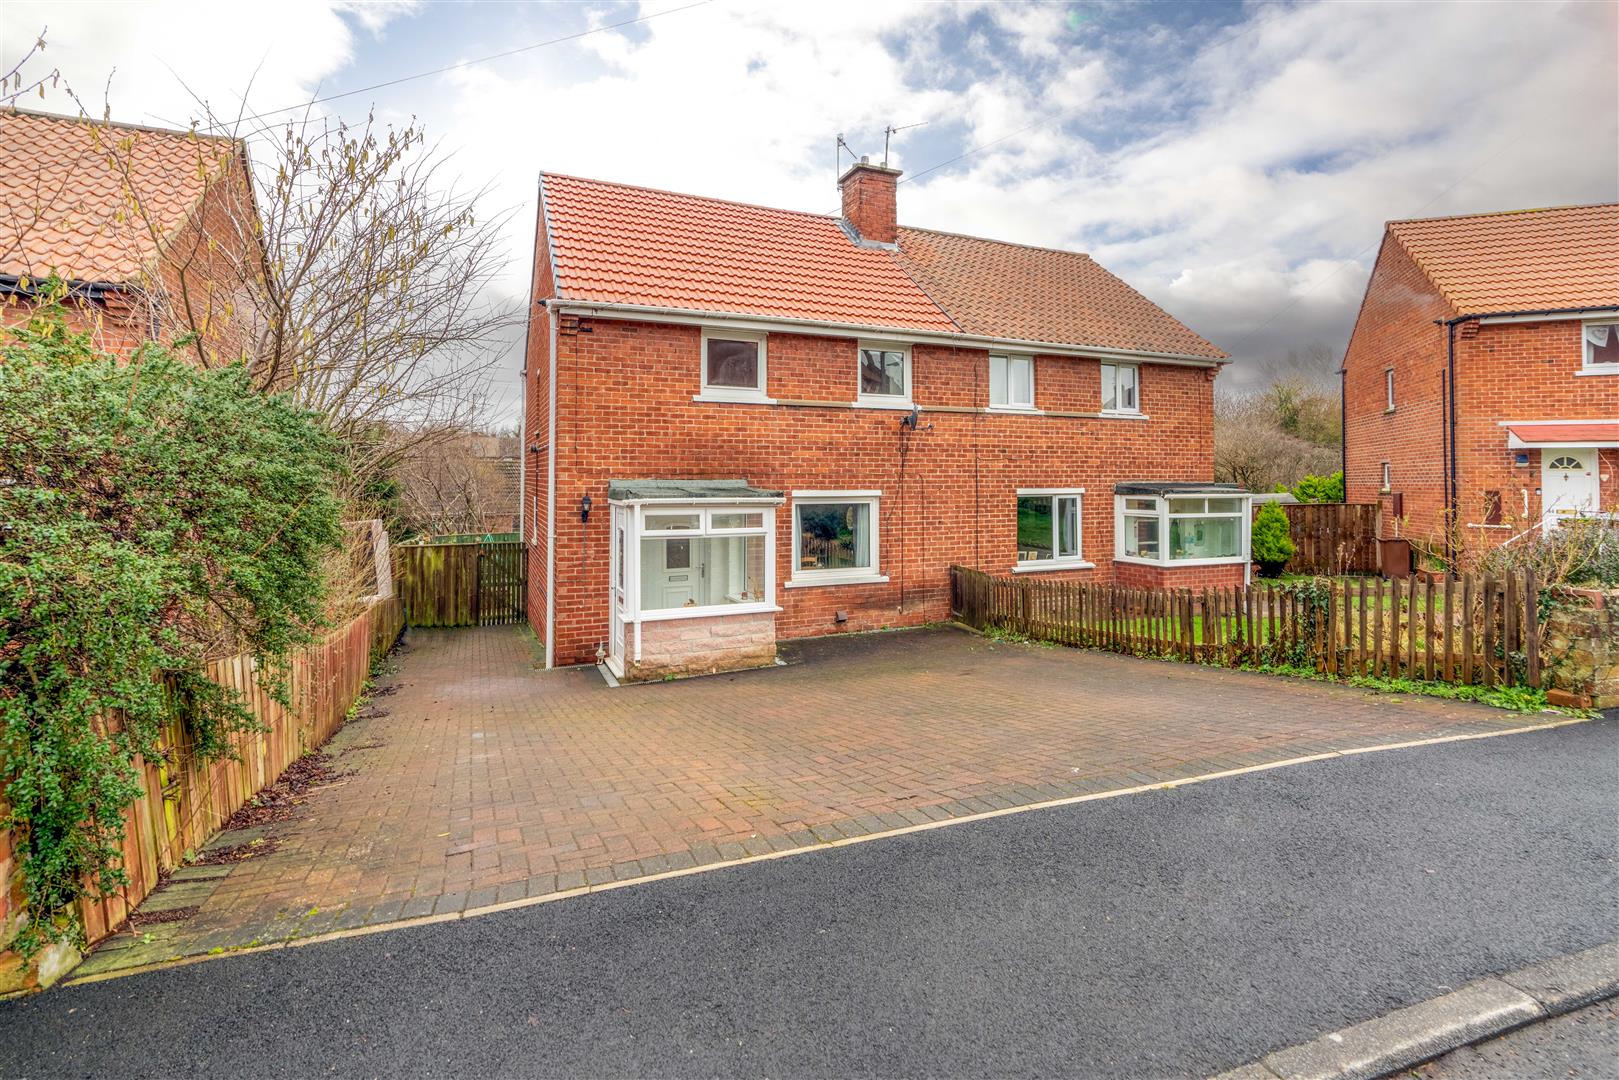 3 bed semi-detached house for sale in Postern Crescent, Morpeth, NE61